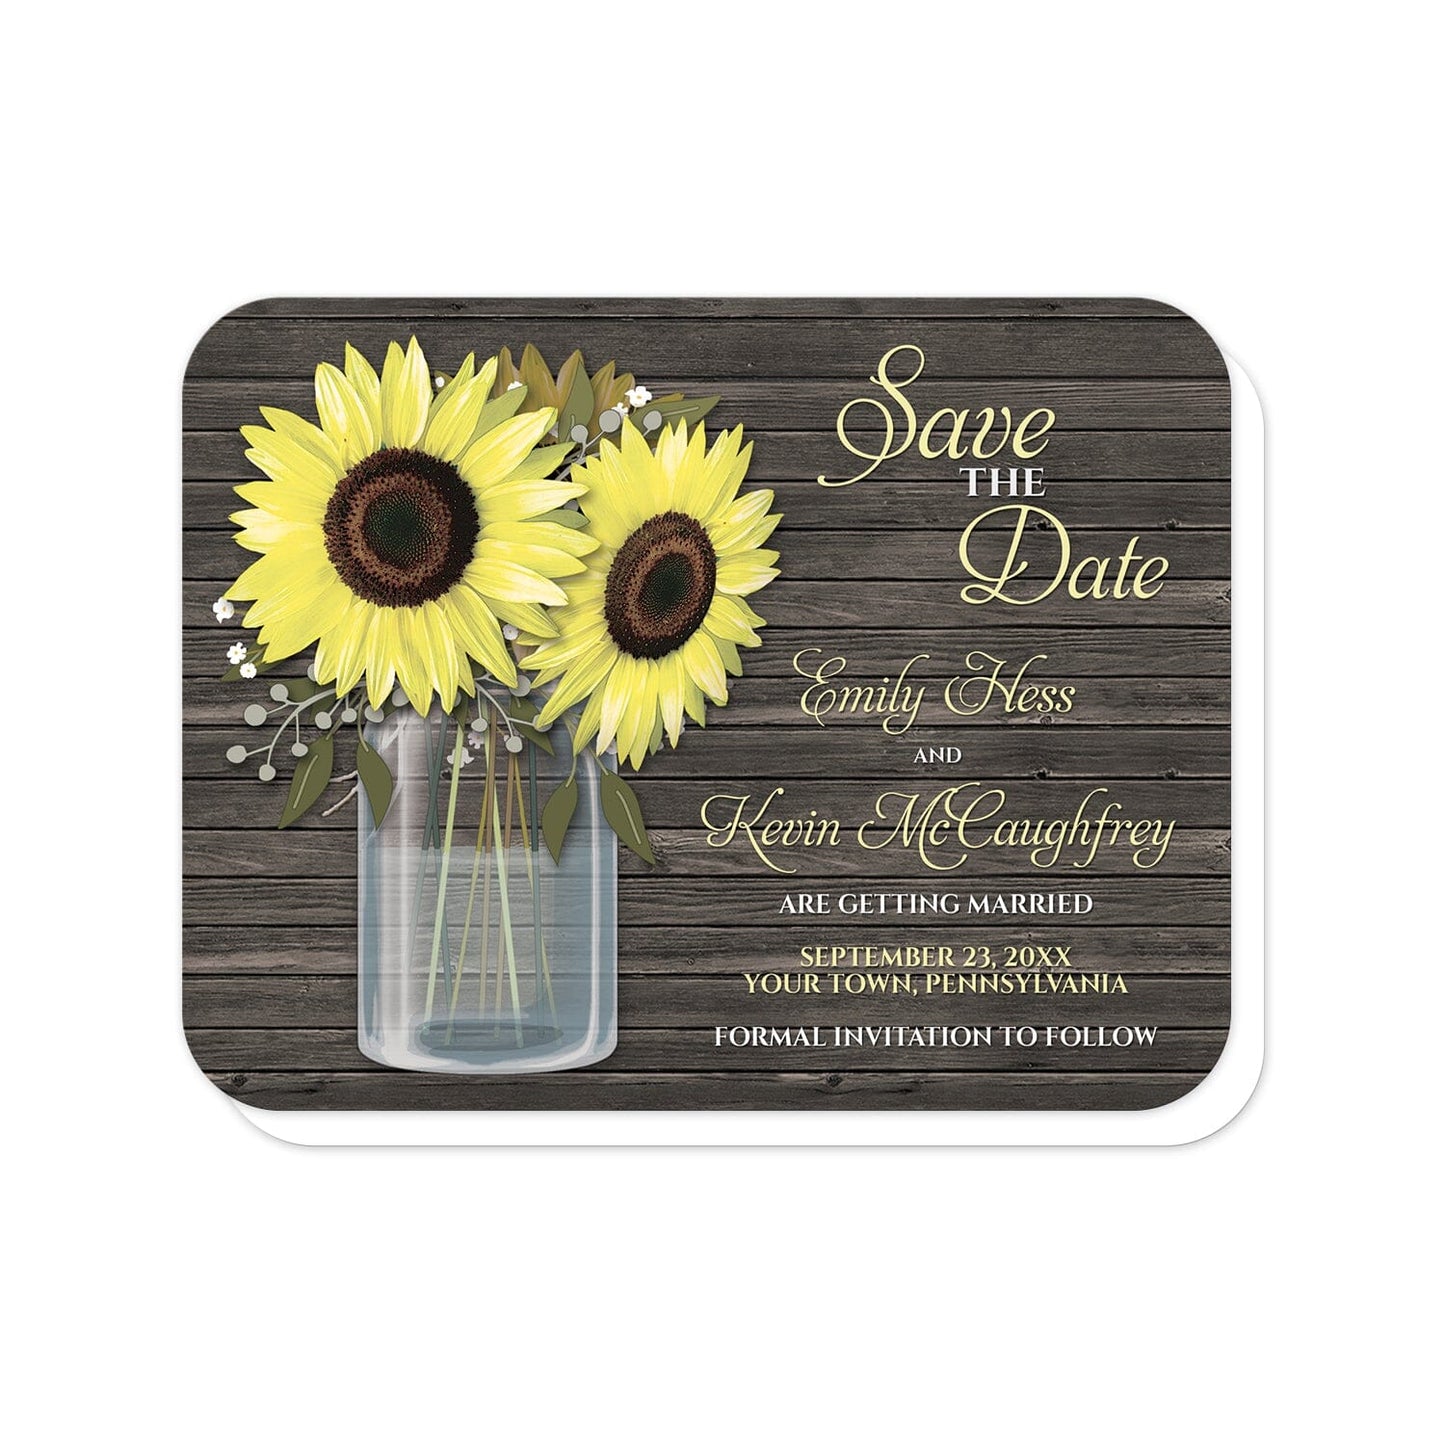 Rustic Sunflower Wood Mason Jar Save the Date Cards (with rounded corners) at Artistically Invited. Southern country-inspired rustic sunflower wood mason jar save the date cards with big yellow sunflowers, small accents of baby's breath, and green leaves in a glass mason jar illustration. Your personalized wedding date details are custom printed in yellow and white to the right of the sunflowers and mason jar design over a dark brown wood background.